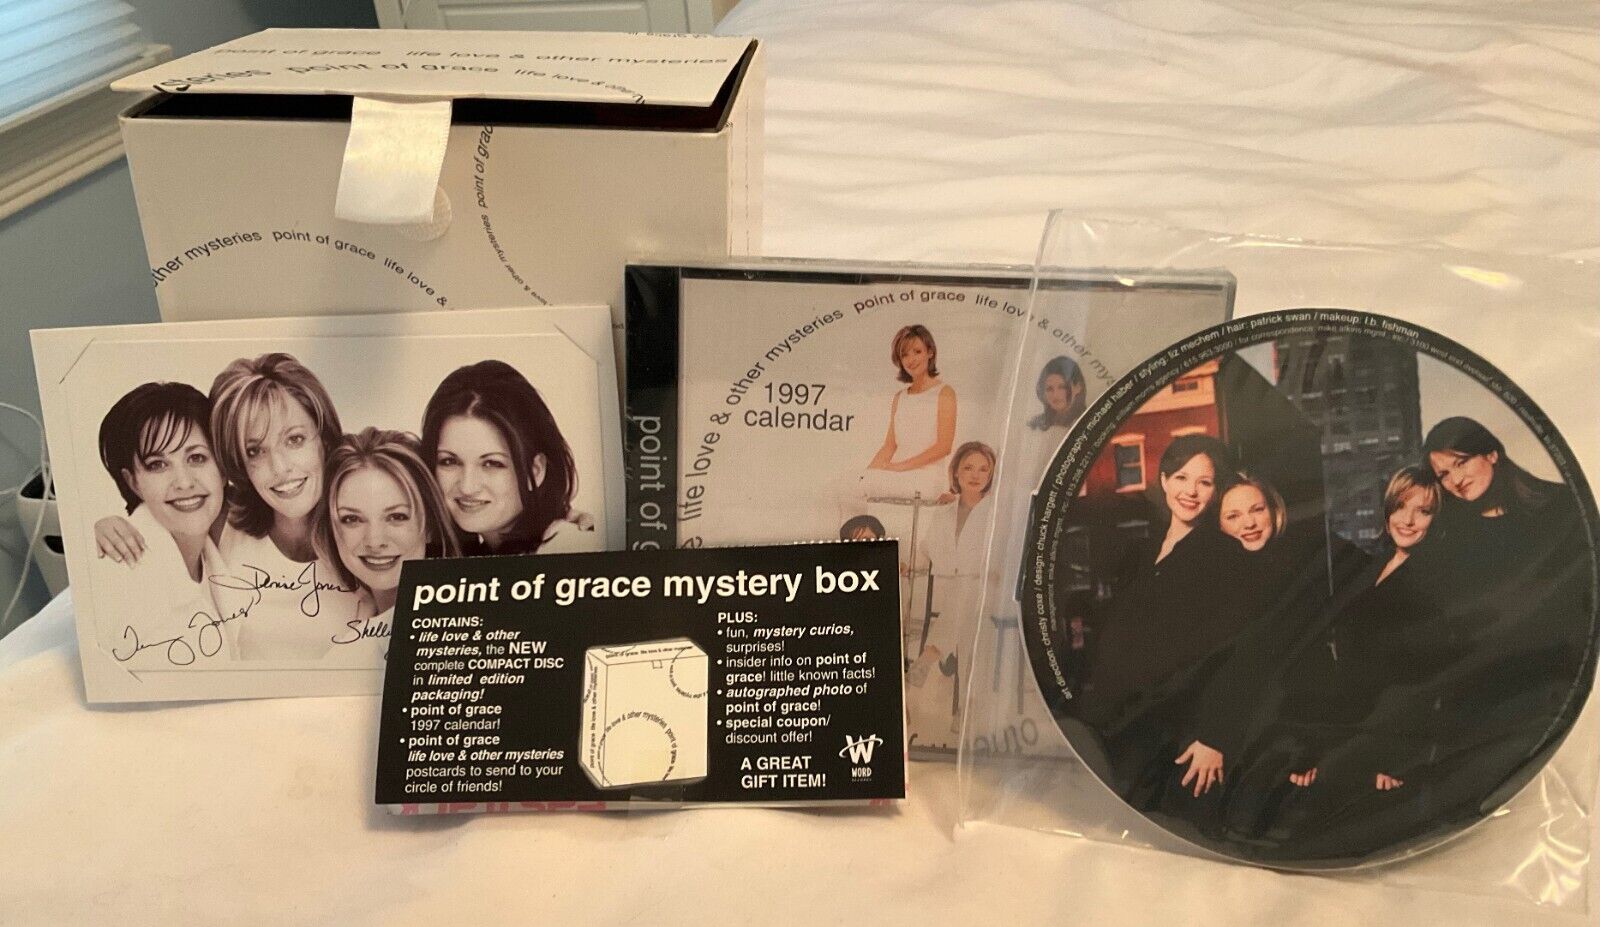 Lot of Point of Grace Christian Music/Memorabilia - CDs Books DVDs Signed Photos